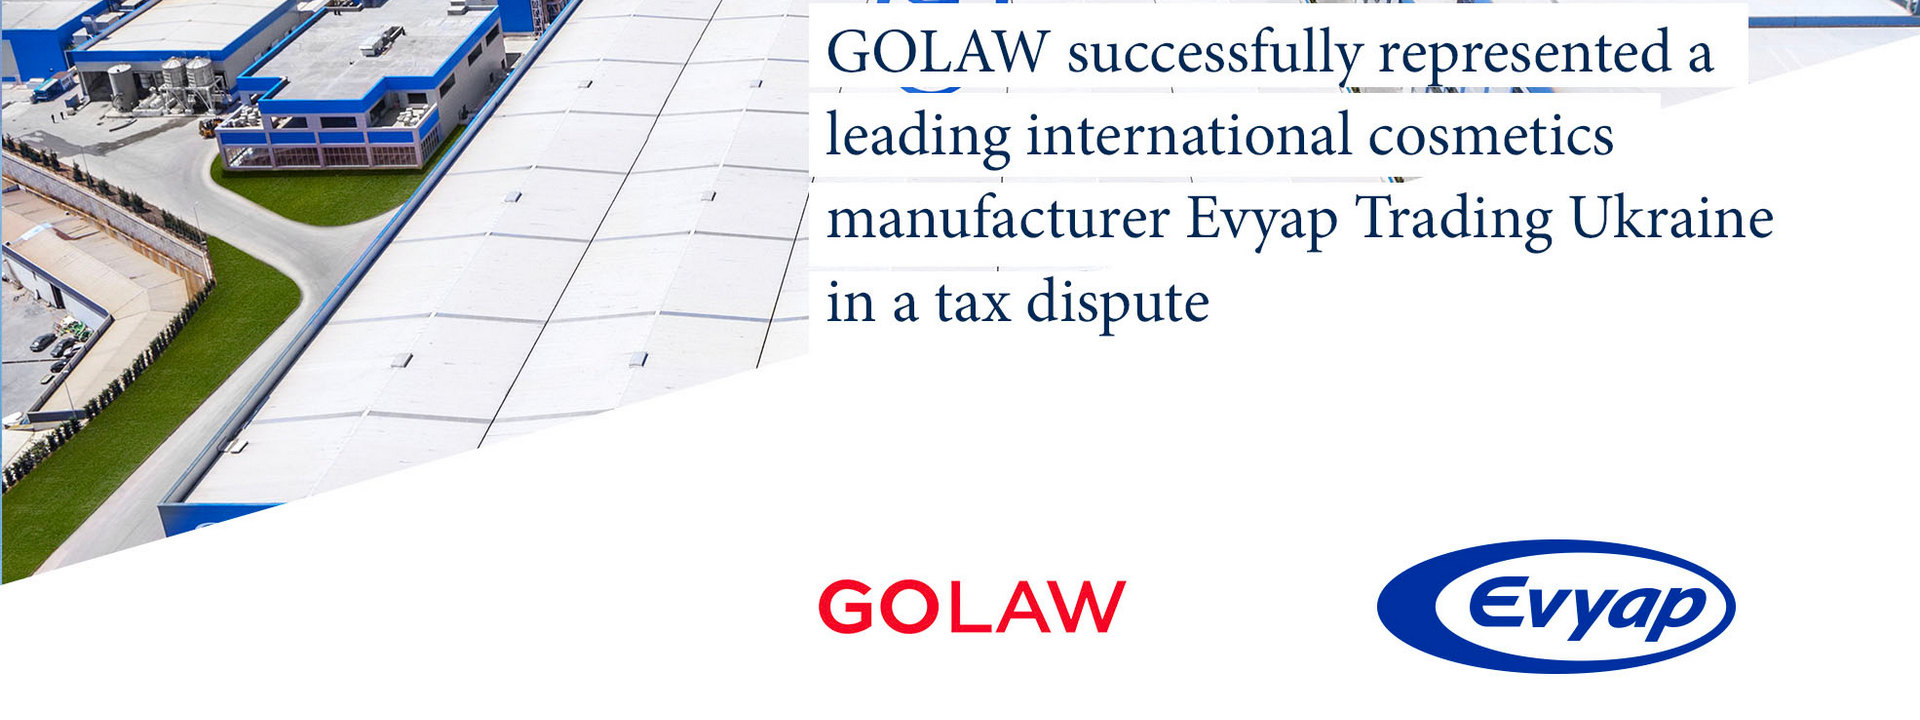 GOLAW Successfully Represented Evyap Trading Ukraine in a Tax Dispute